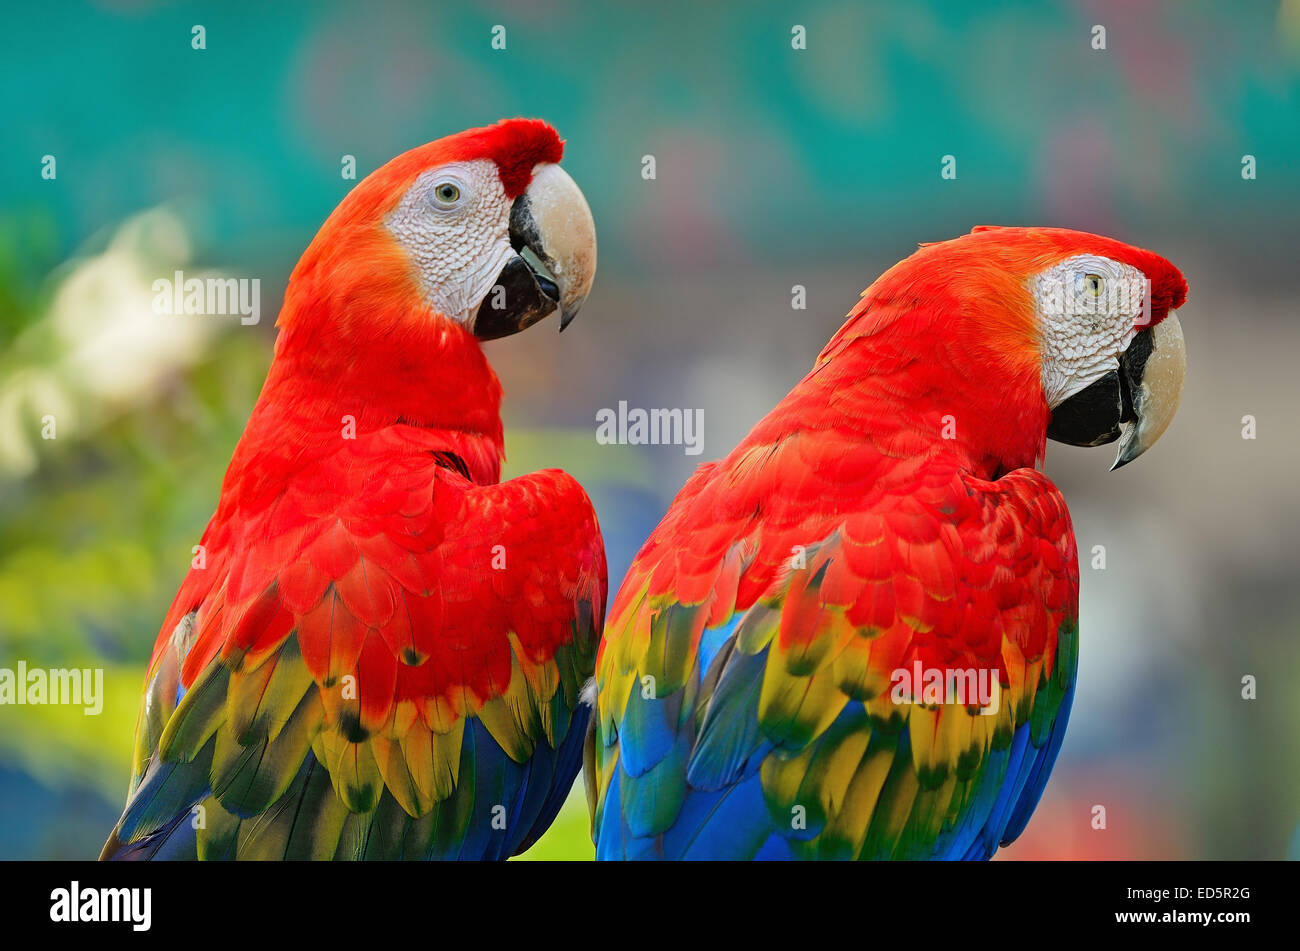 Couple of colorful Scarlet Macaw aviary, back profile Stock Photo